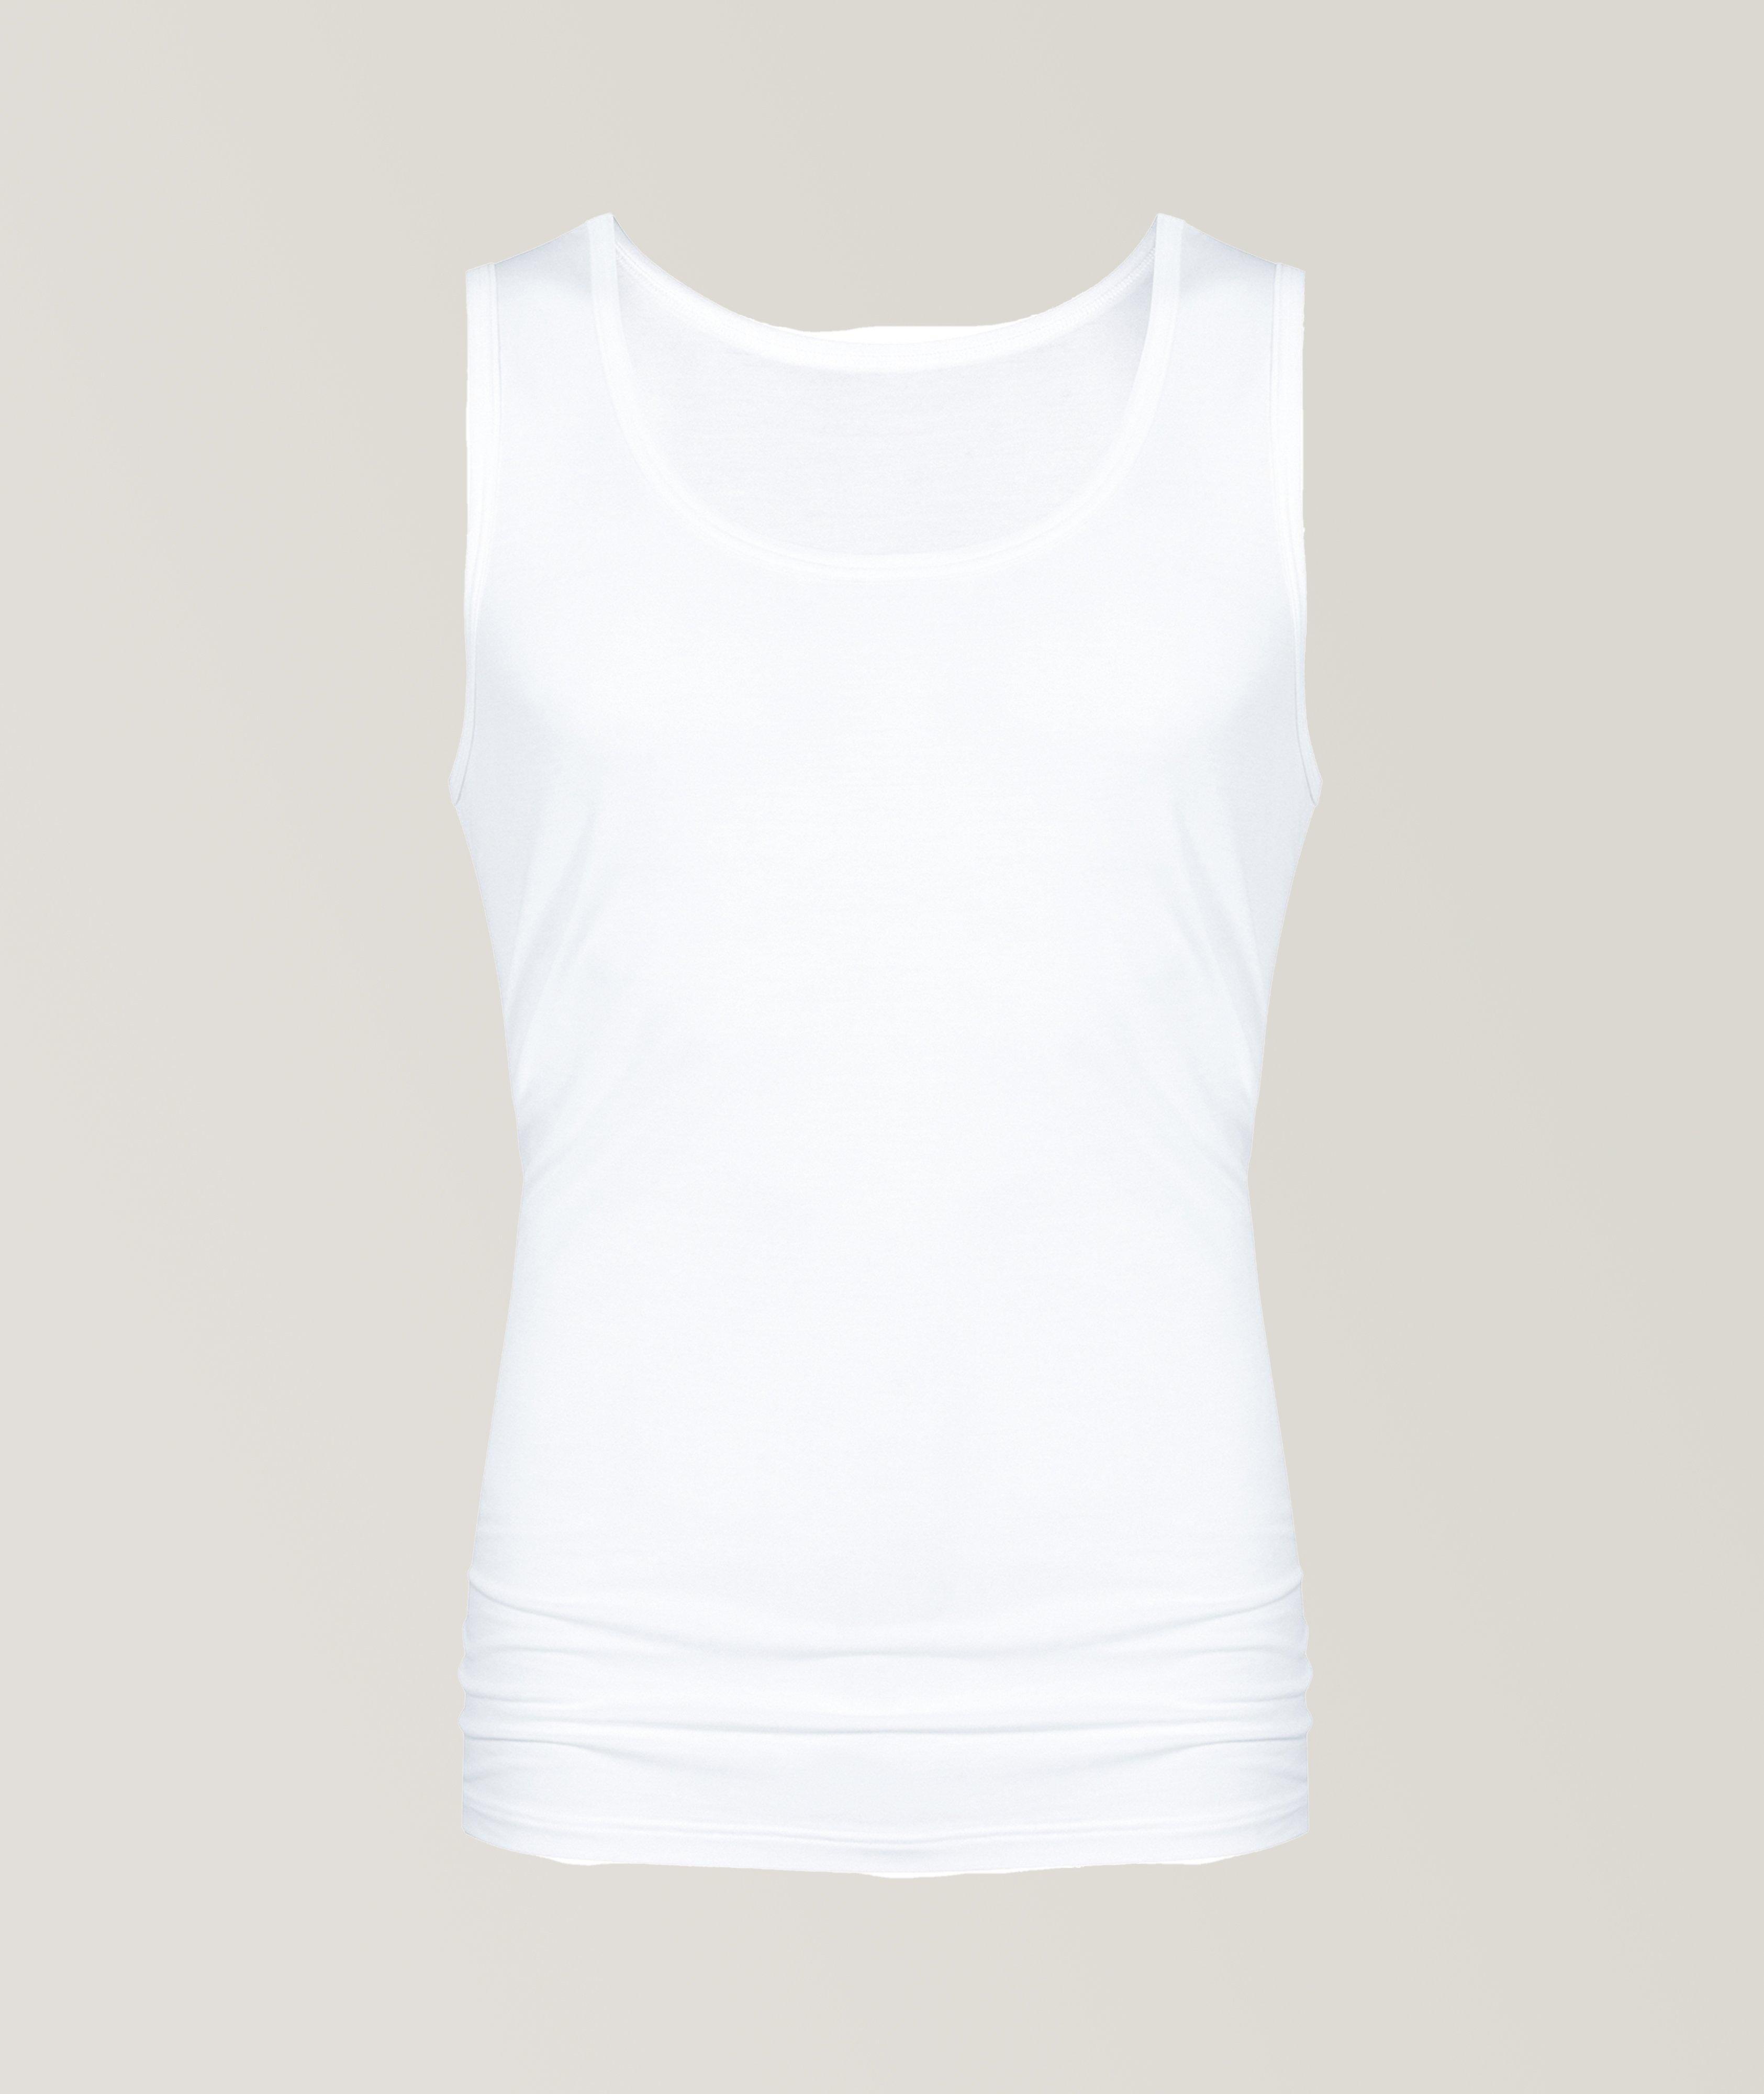 Superior Stretch Modal Tank Top image 0